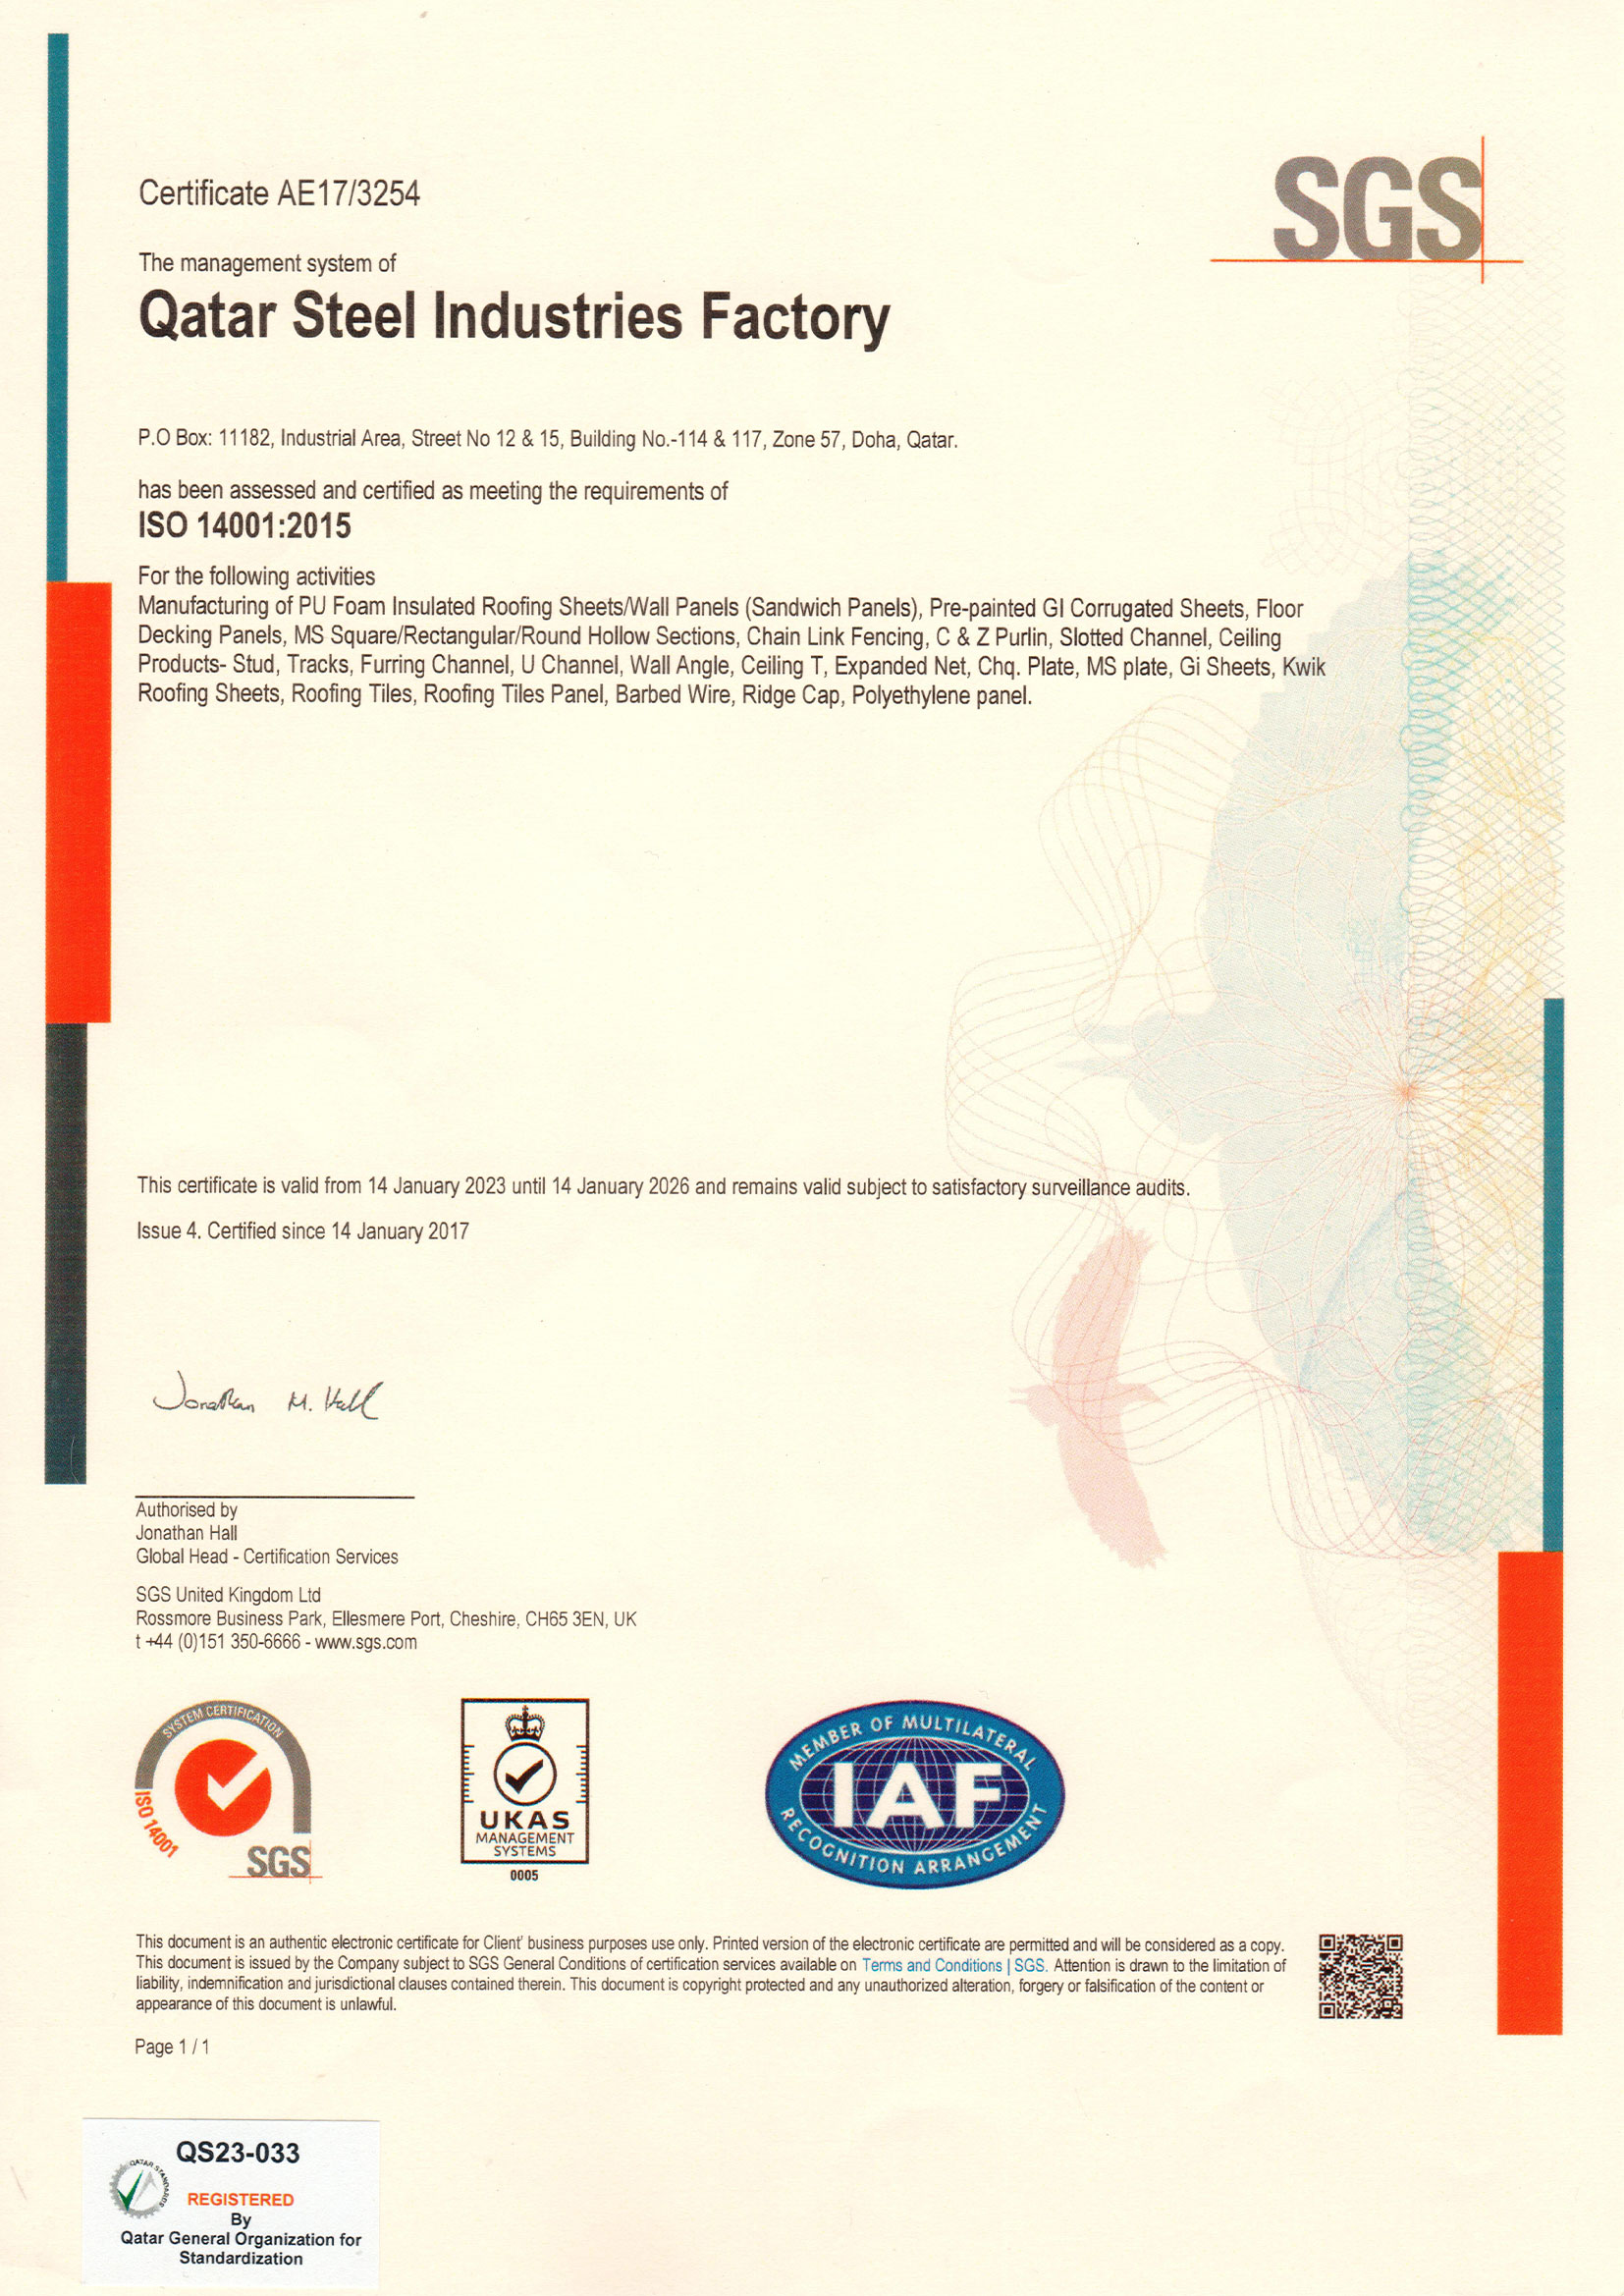 Qatar Steel Factory Quality Certification ISO-14001-2015